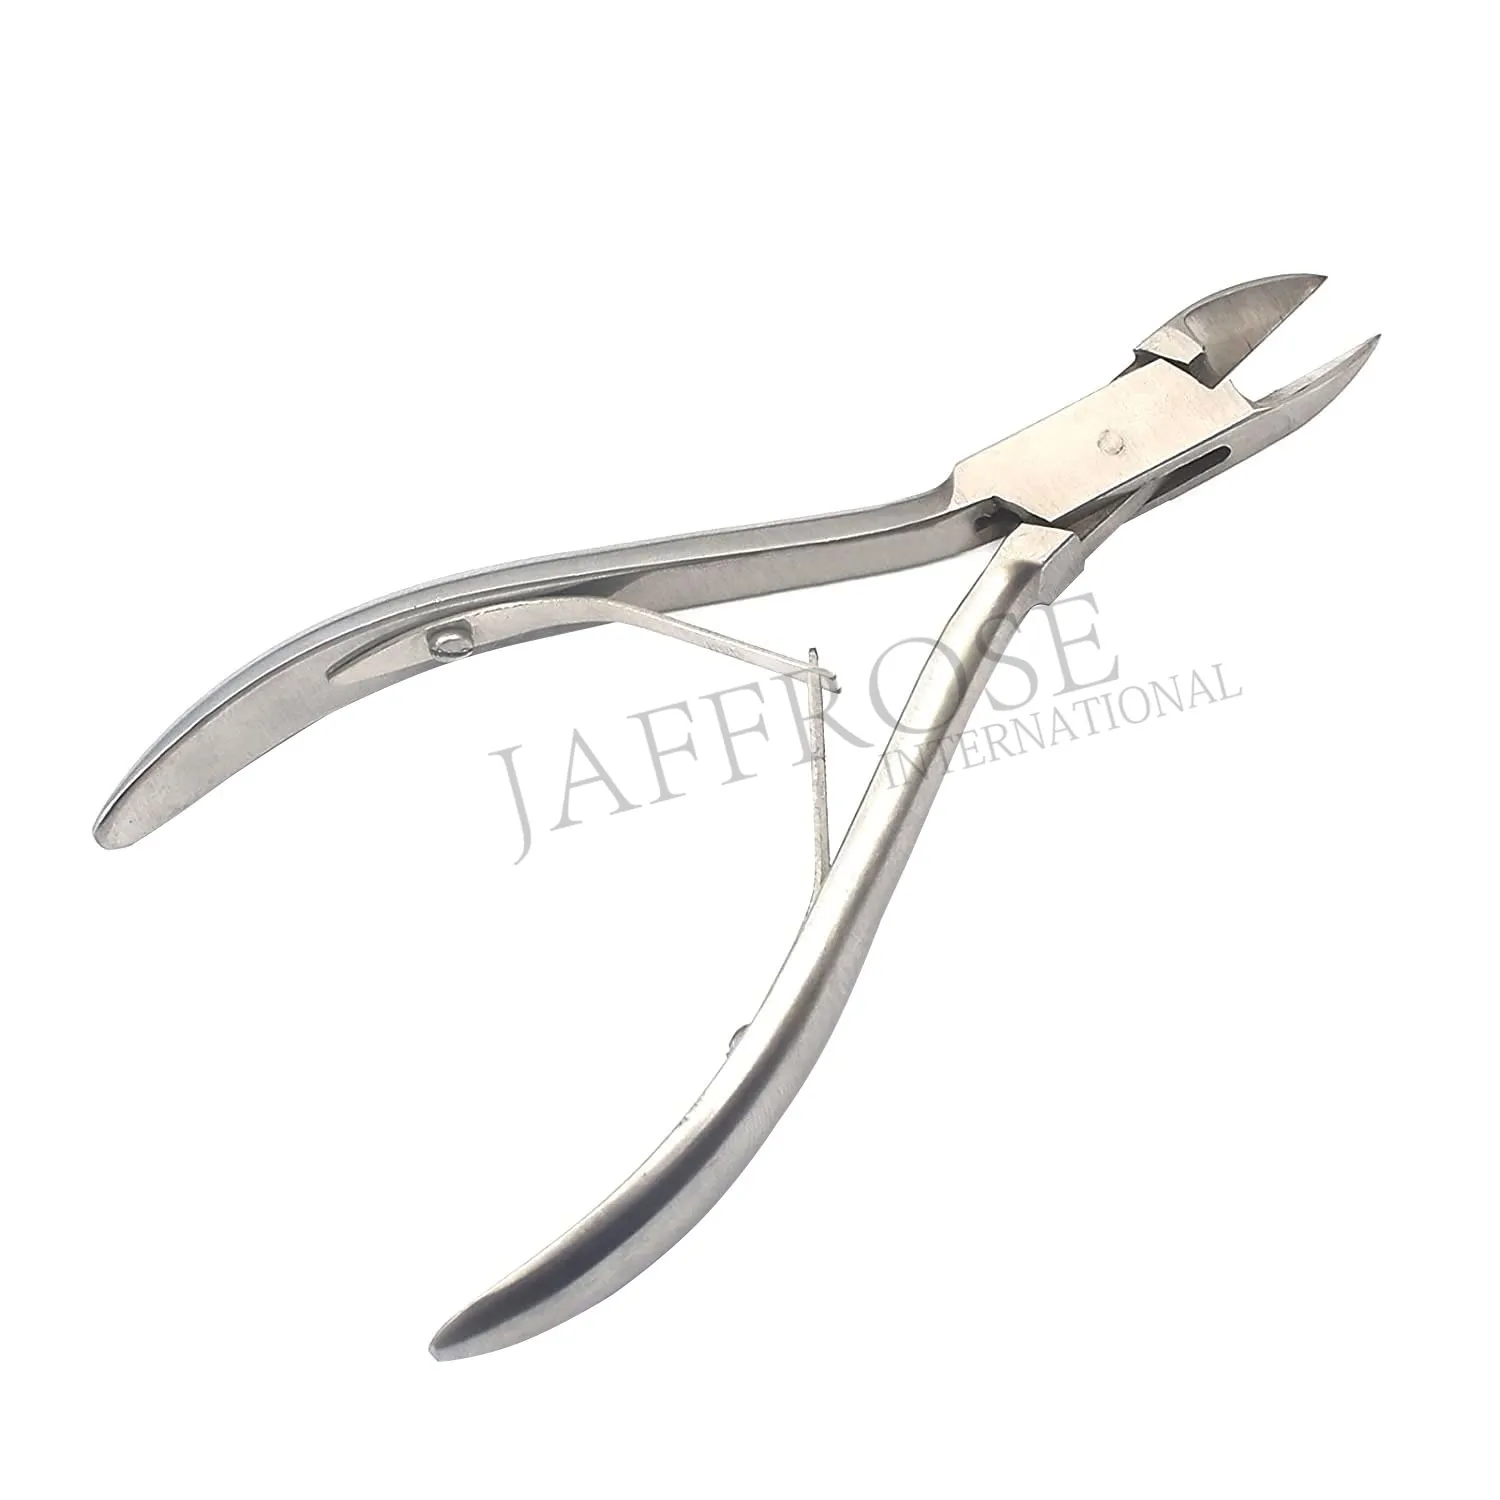 Professional Manicure And Pedicure Tool Stainless Steel Cuticle Nipper Cutter Cuticle Clipper For Fingernail And Toenail Nail